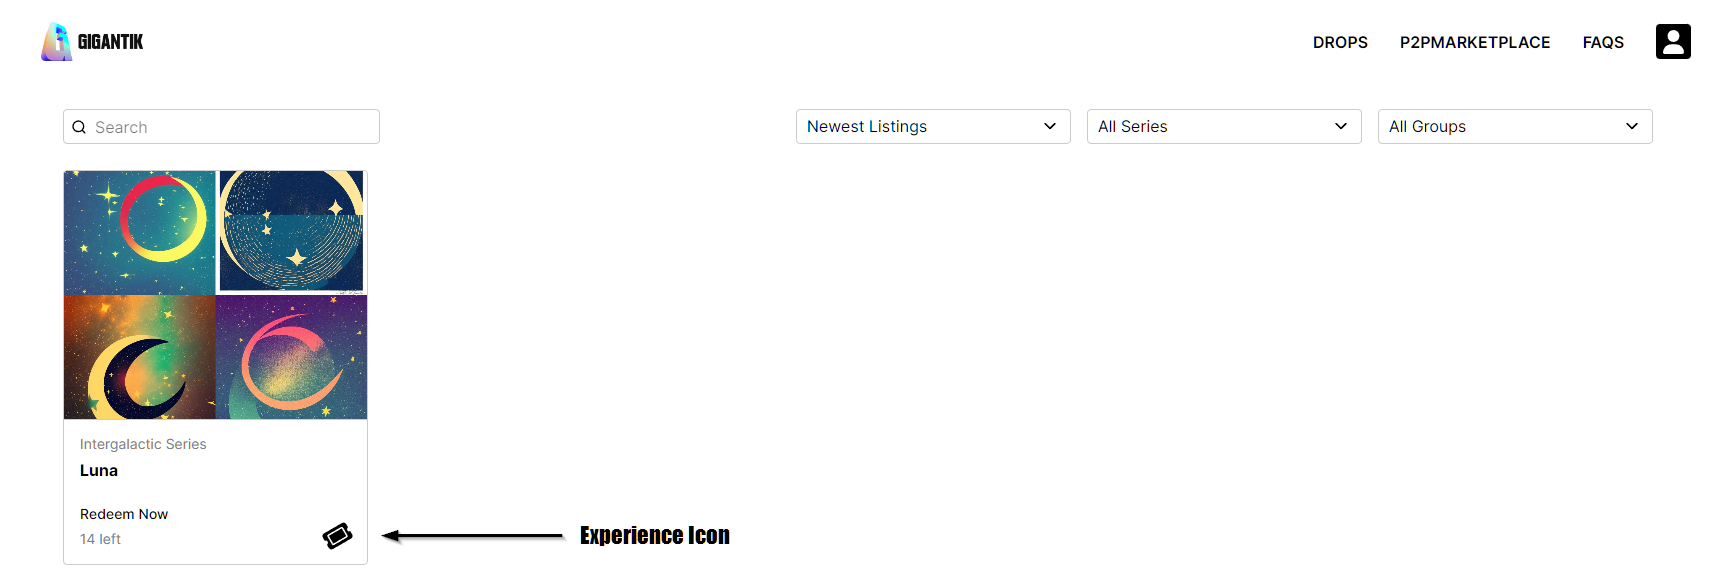 Experience Icon indicating this listing has an experience associated with it